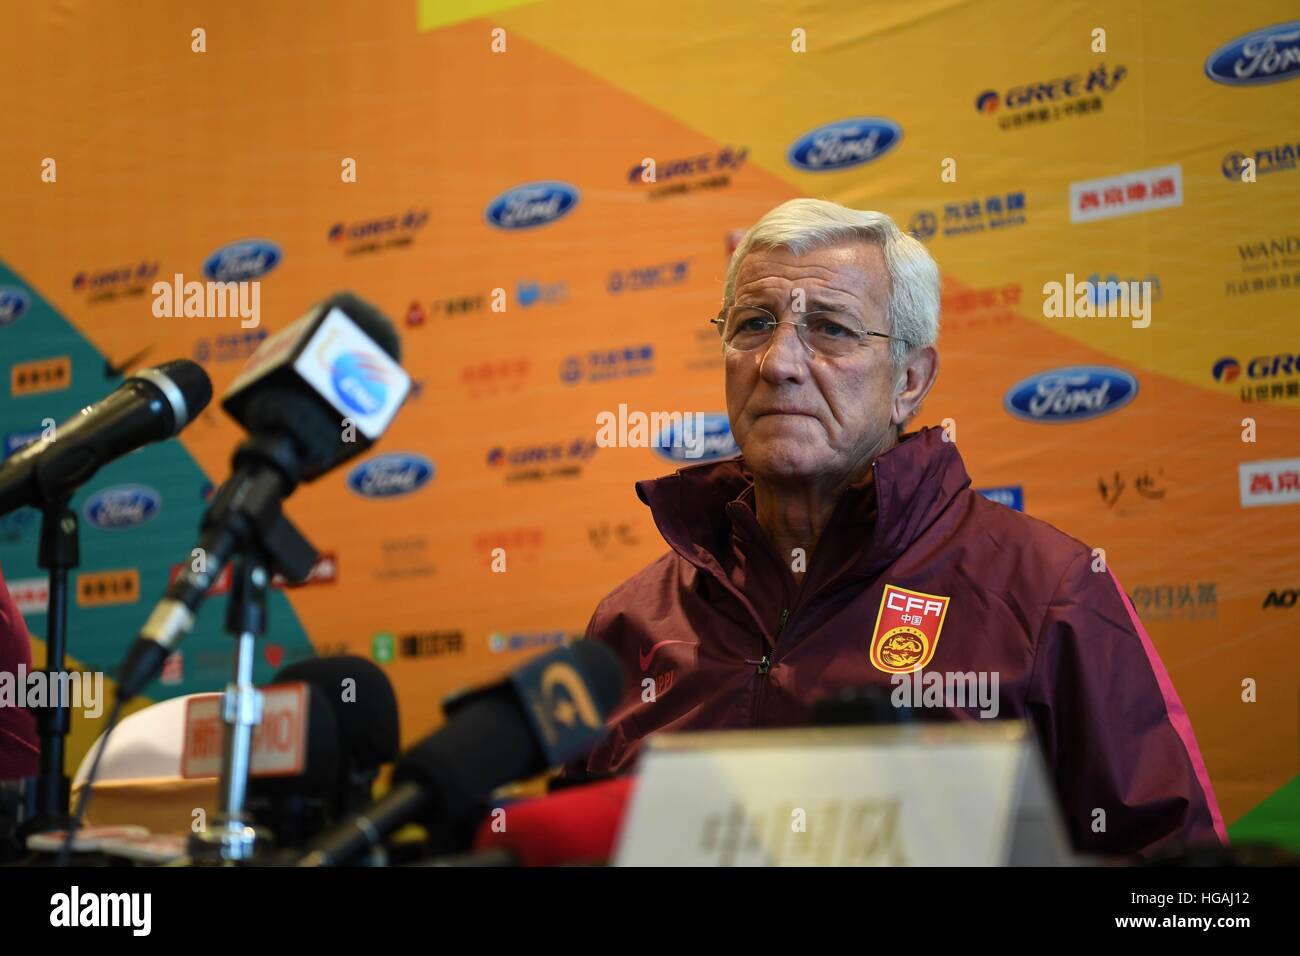 Nanning, Nanning, China. 6th Jan, 2017. Nanning, CHINA-January 6 2017: (EDITORIAL USE ONLY. CHINA OUT) Marcello Lippi, coach of Chinese football team, attends a press conference before China Cup 2017 in Nanning, capital of southwest China's Guangxi Zhuang Autonomous Region, January 6th, 2017. Lippi said that Chinese football team would try their best and they would train and select more young football players during the China Cup 2017. © SIPA Asia/ZUMA Wire/Alamy Live News Stock Photo